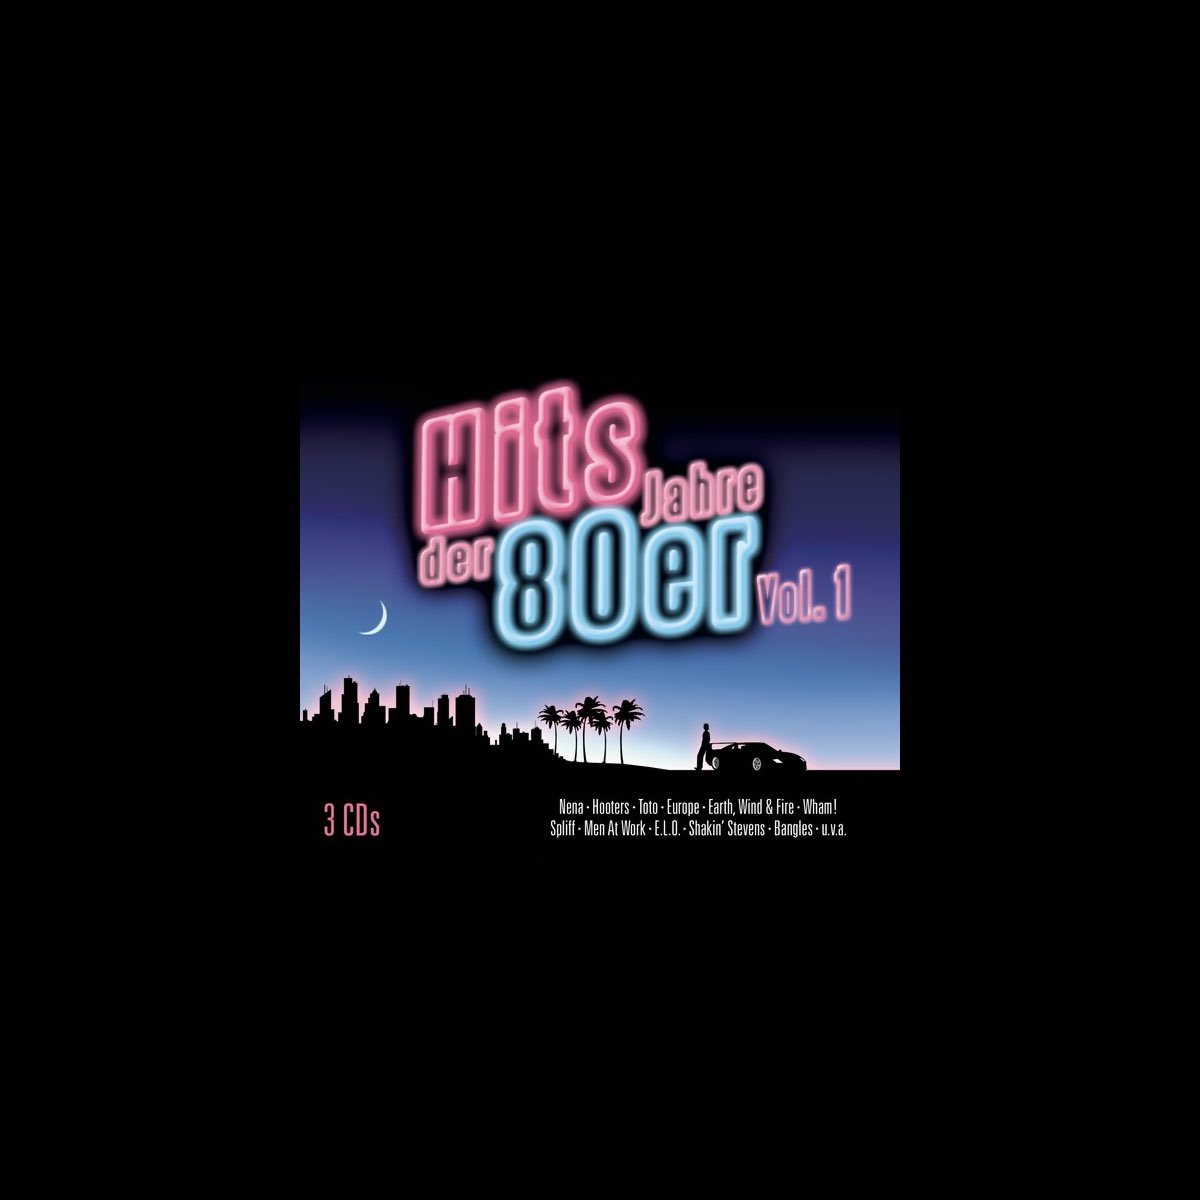 Hits der 80er Jahre, Vol. 1 by Various Artists on Apple Music